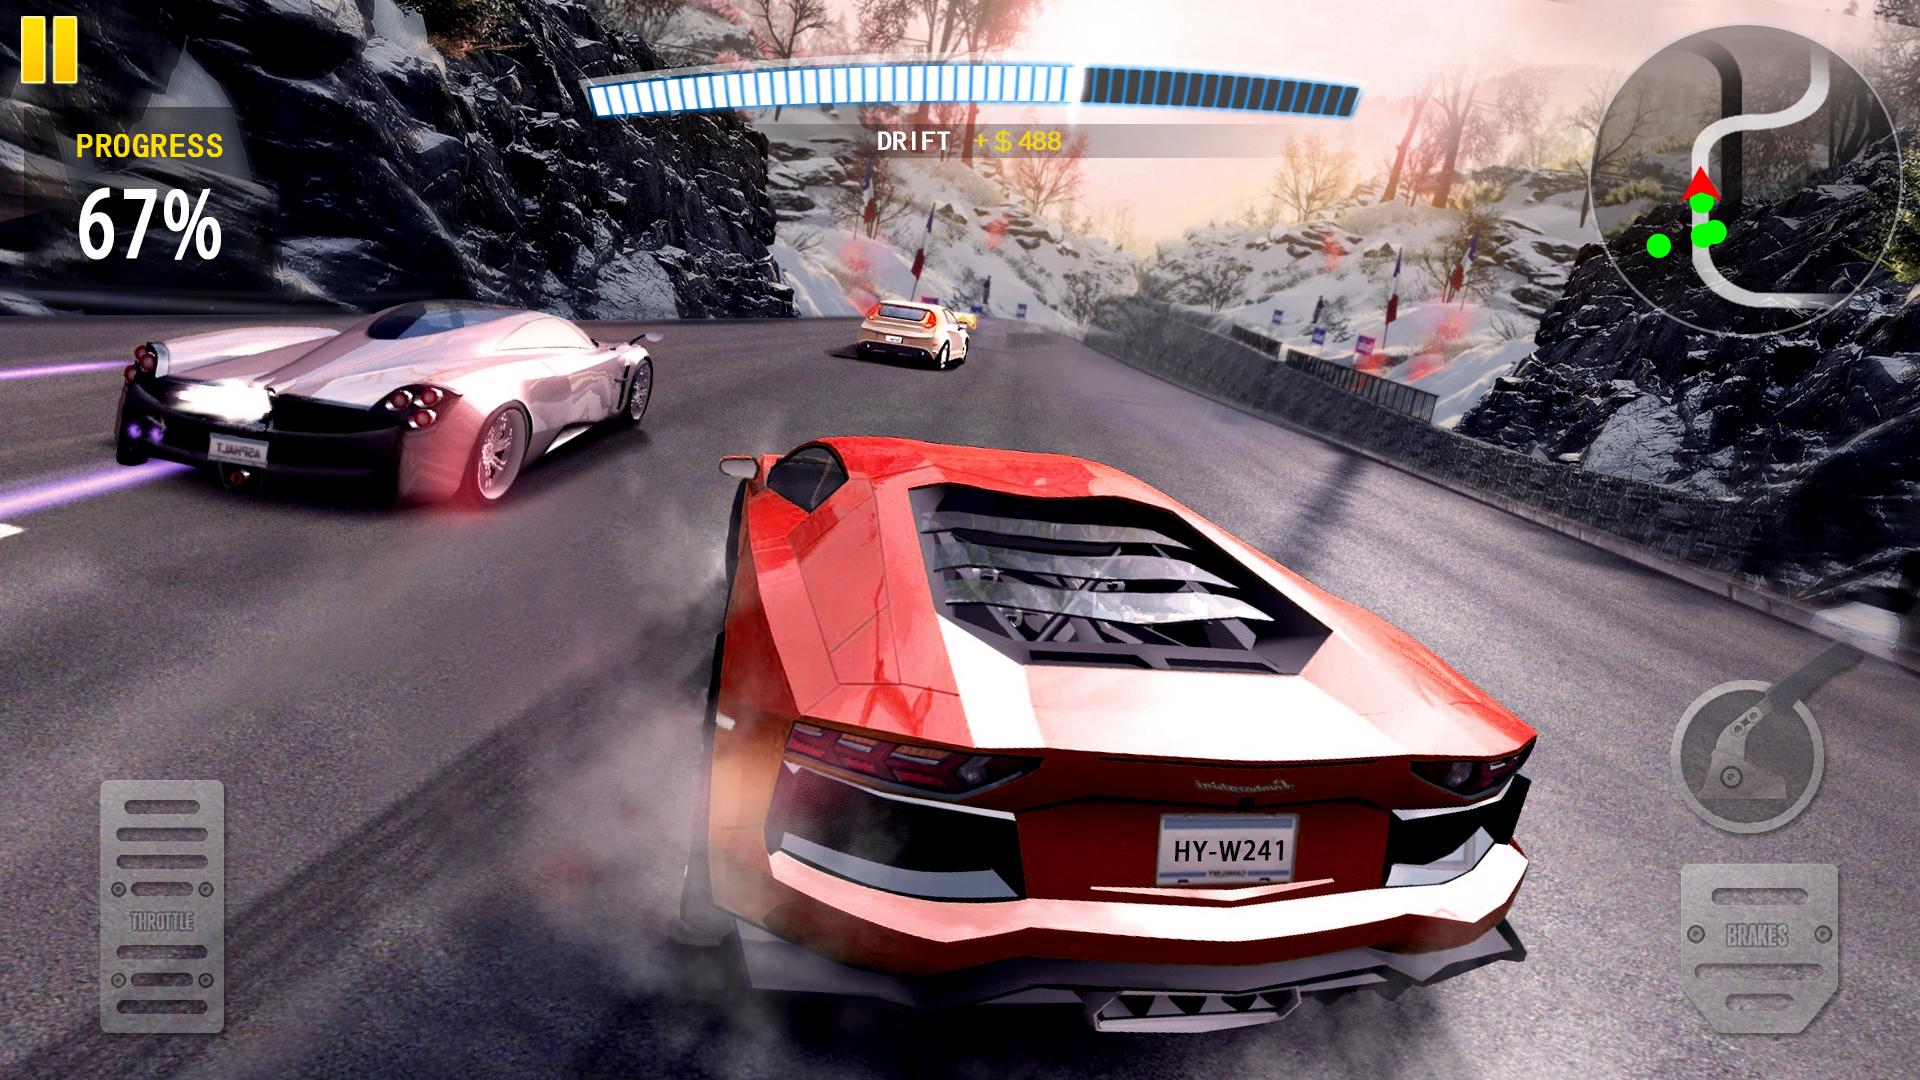 Download CarX Drift Racing on PC with MEmu